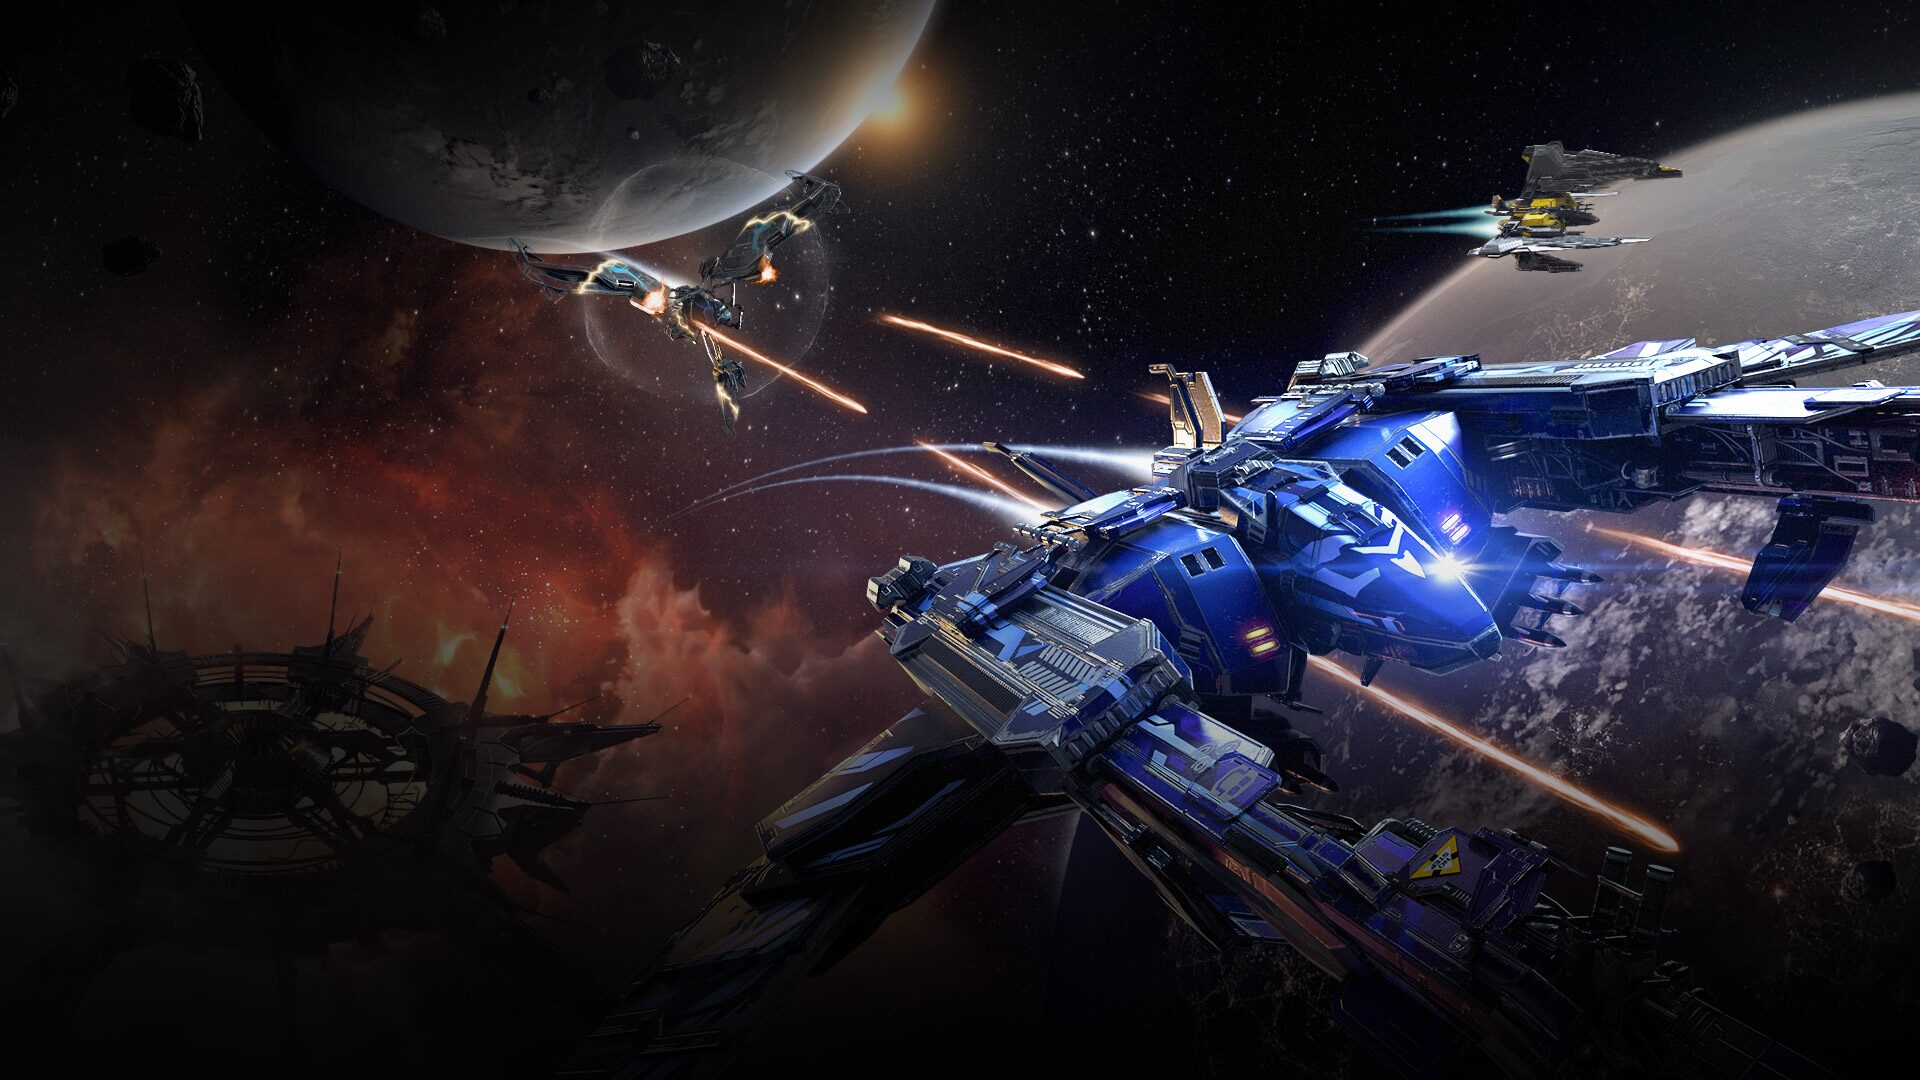 EVE: Valkyrie – Warzone™ 5x Gold Capsule